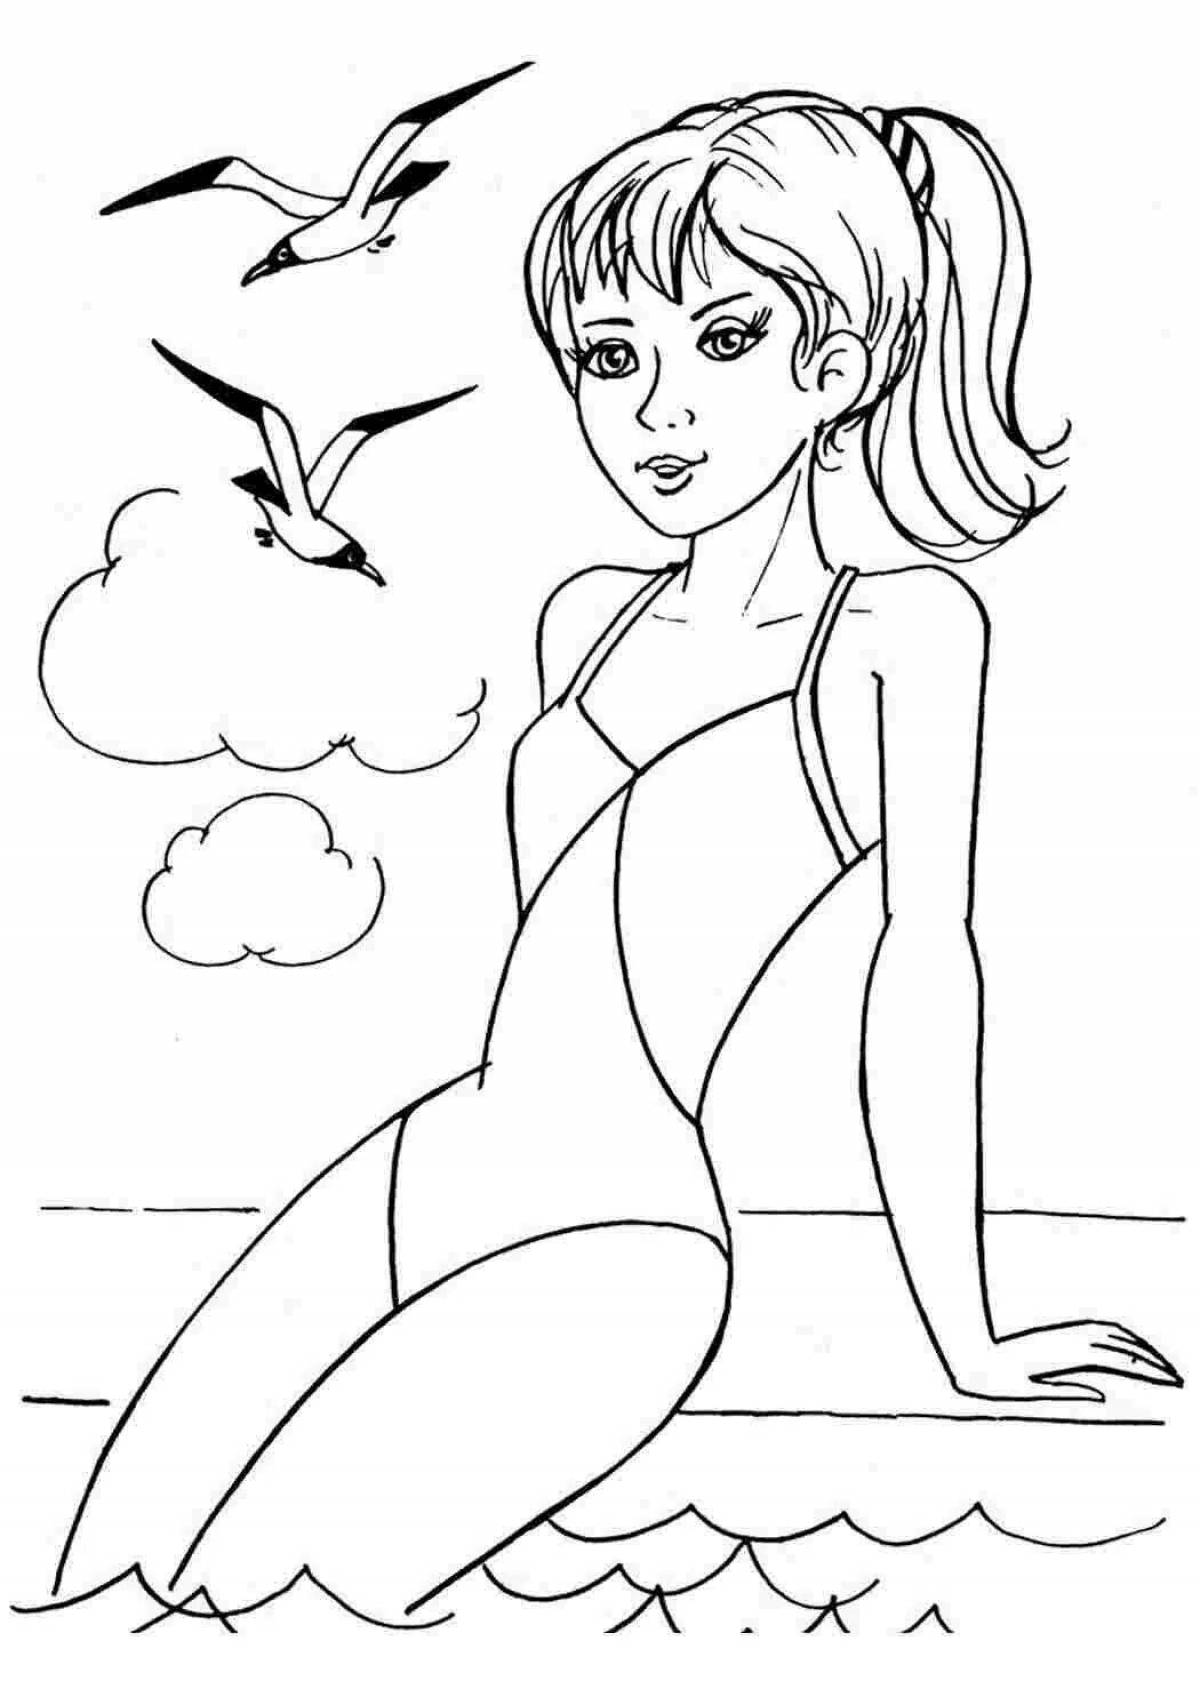 Sparkling coloring page 16 for girls